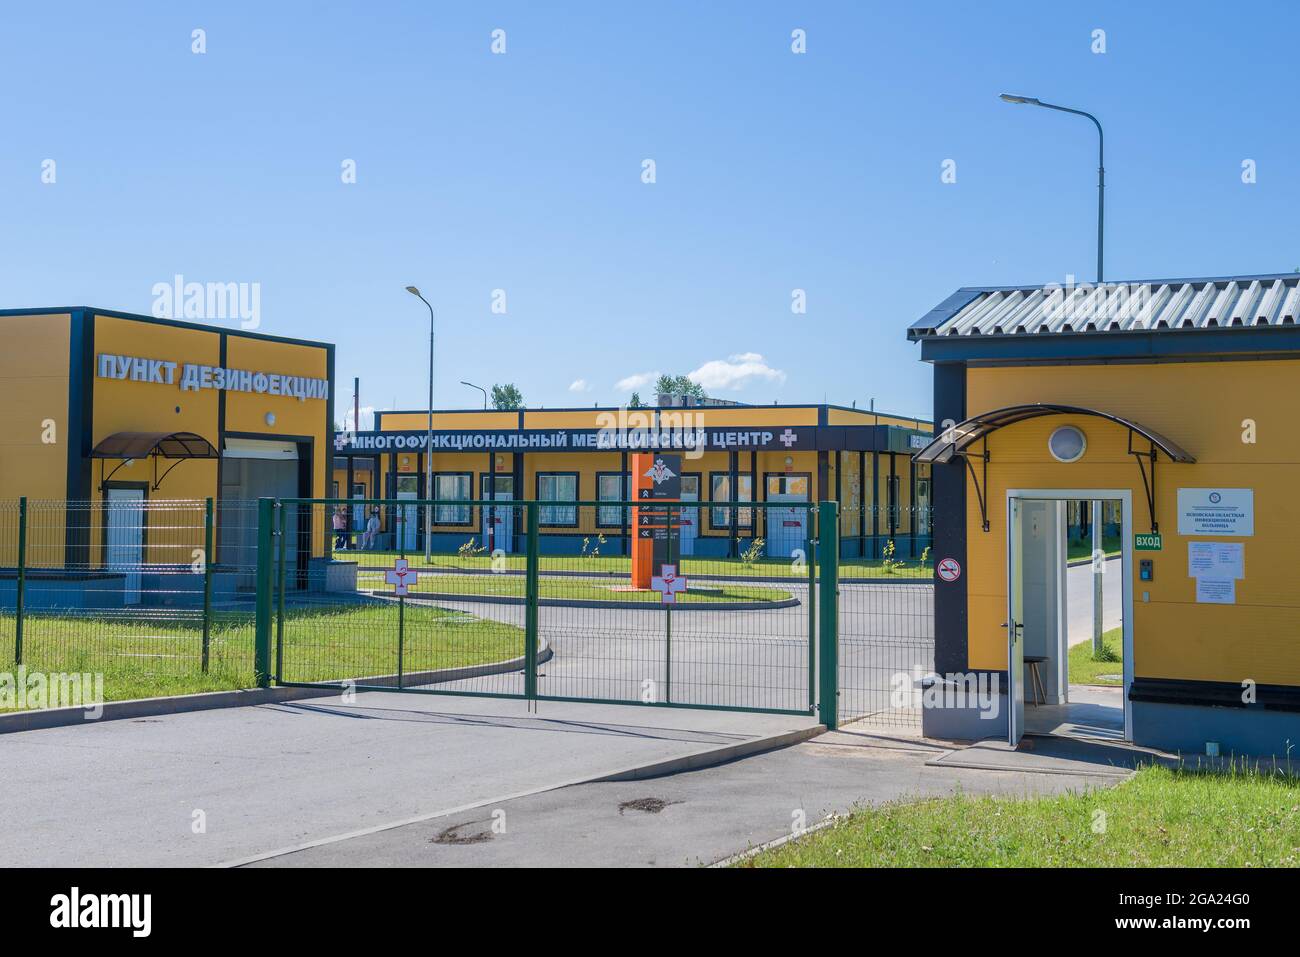 VELIKIE LUKI, RUSSIA - JULY 04, 2021: At the entrance to the 'Pskov Regional Infectious Diseases Hospital' (Velikie Luki branch) on a sunny summer day Stock Photo